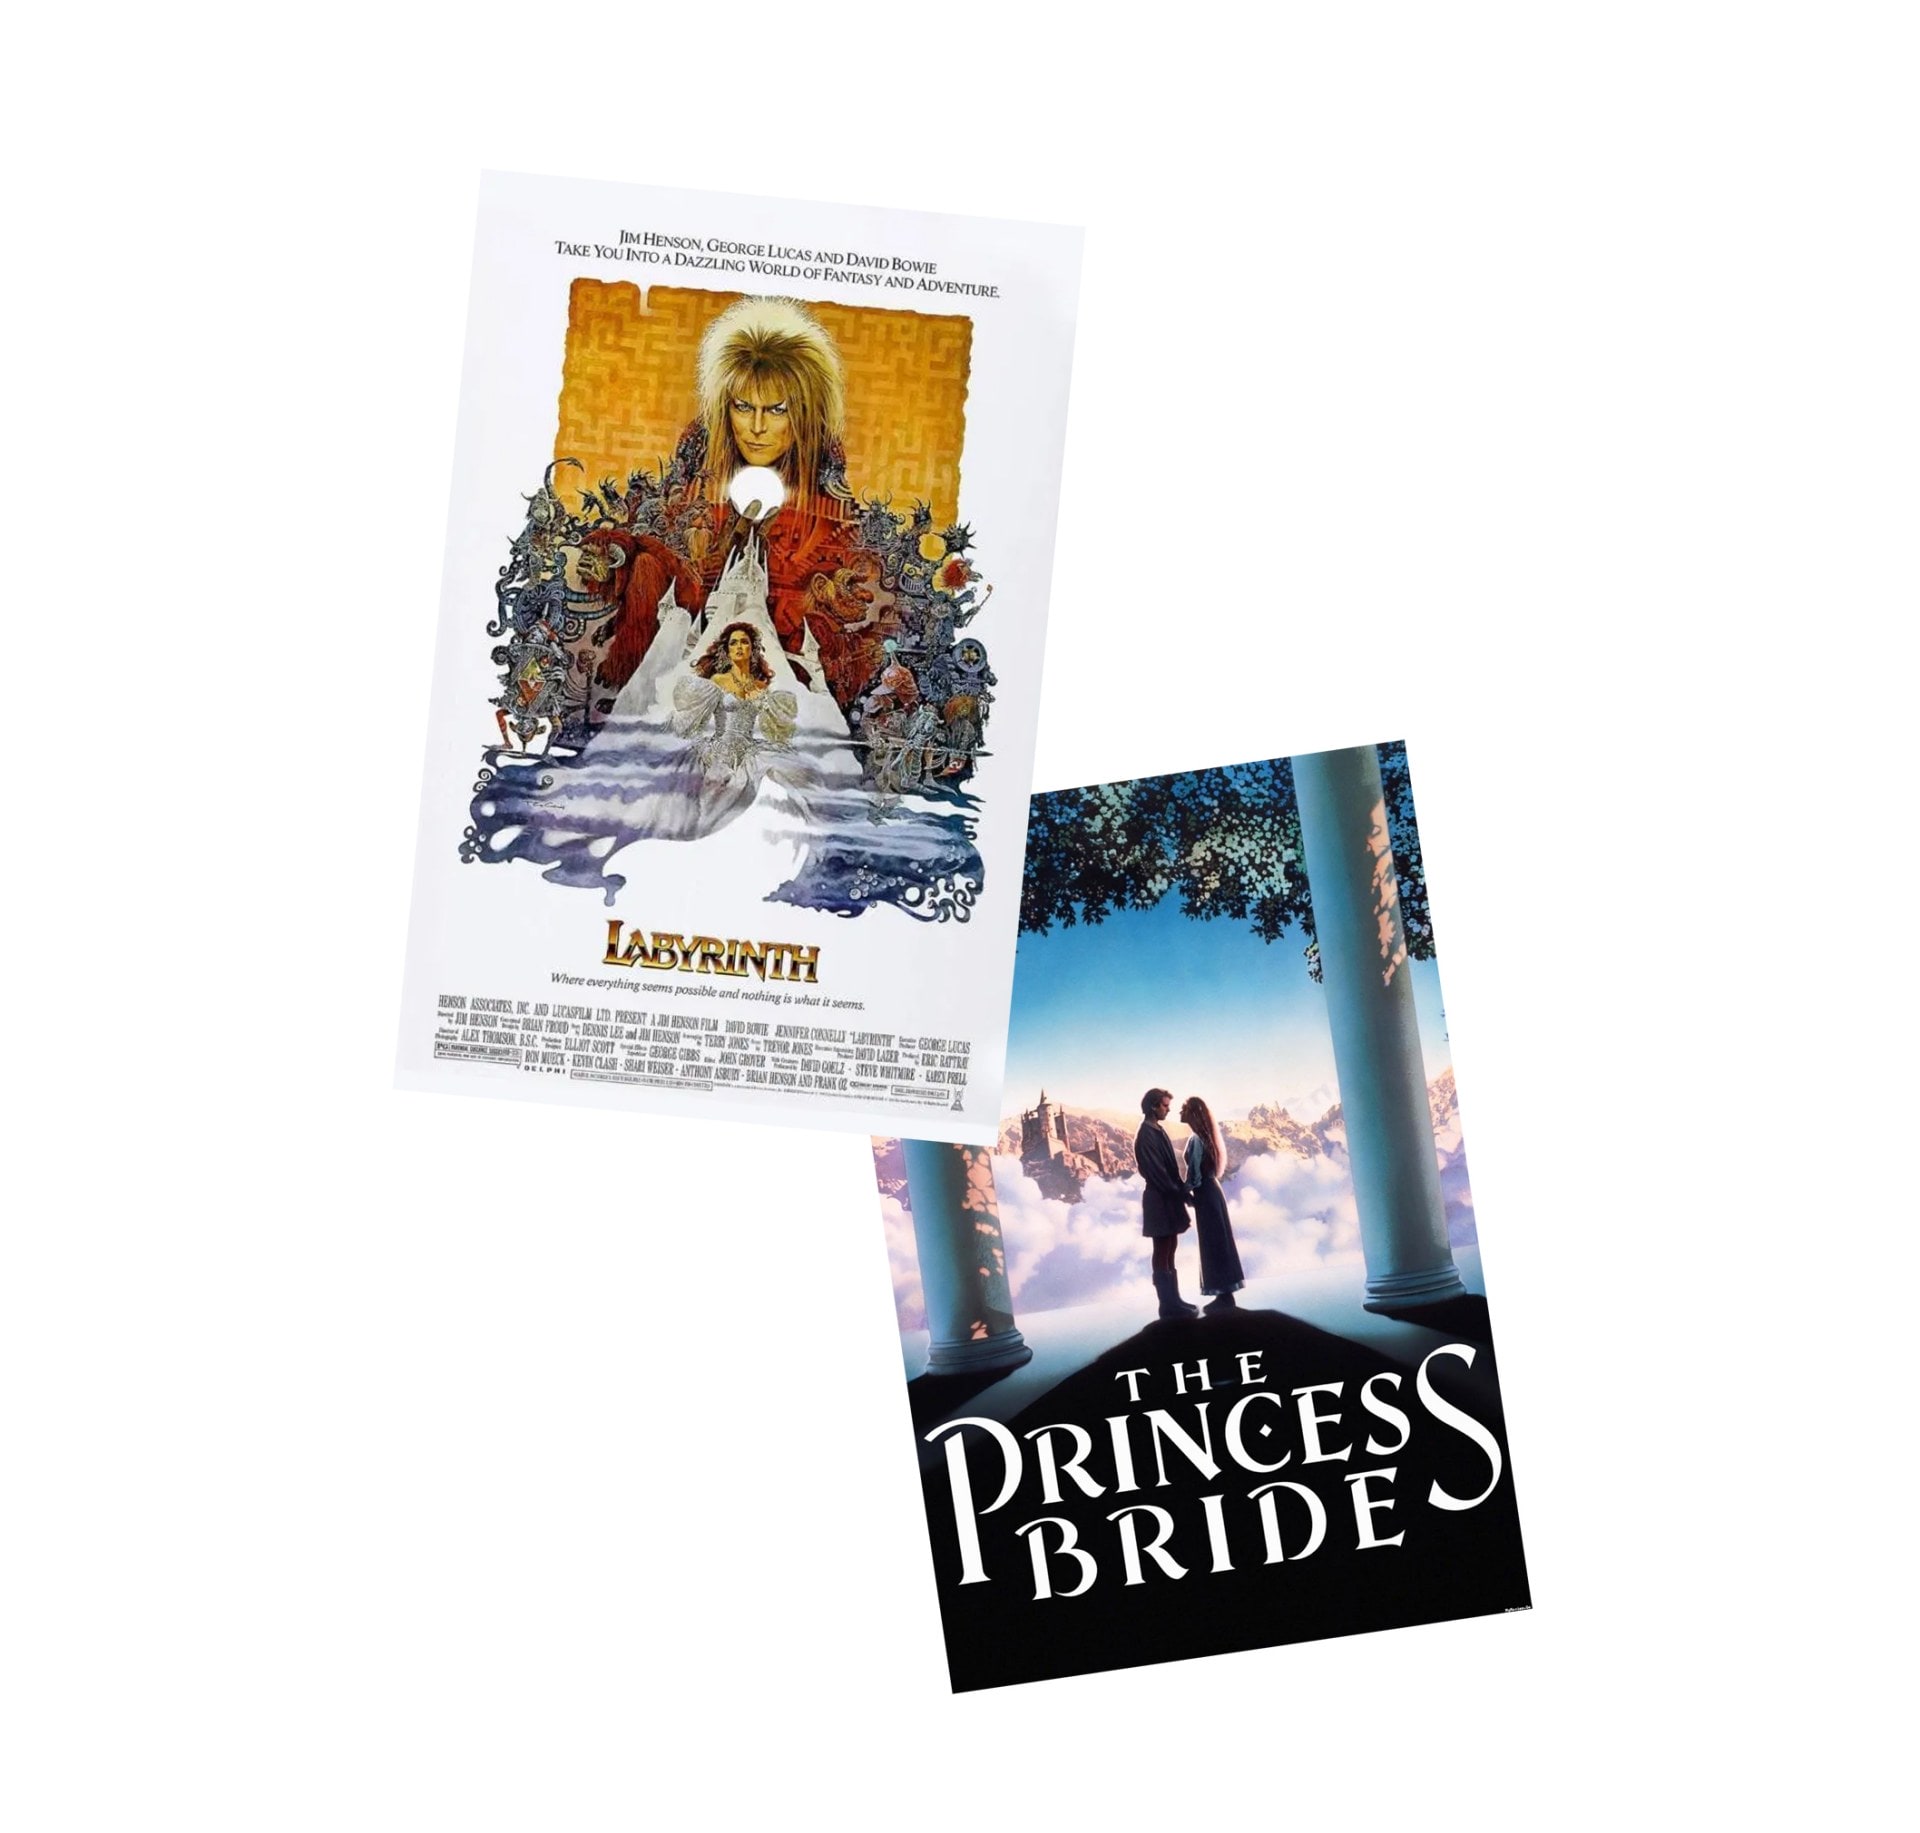 The Princess Bride and Labyrinth movie posters on a white background